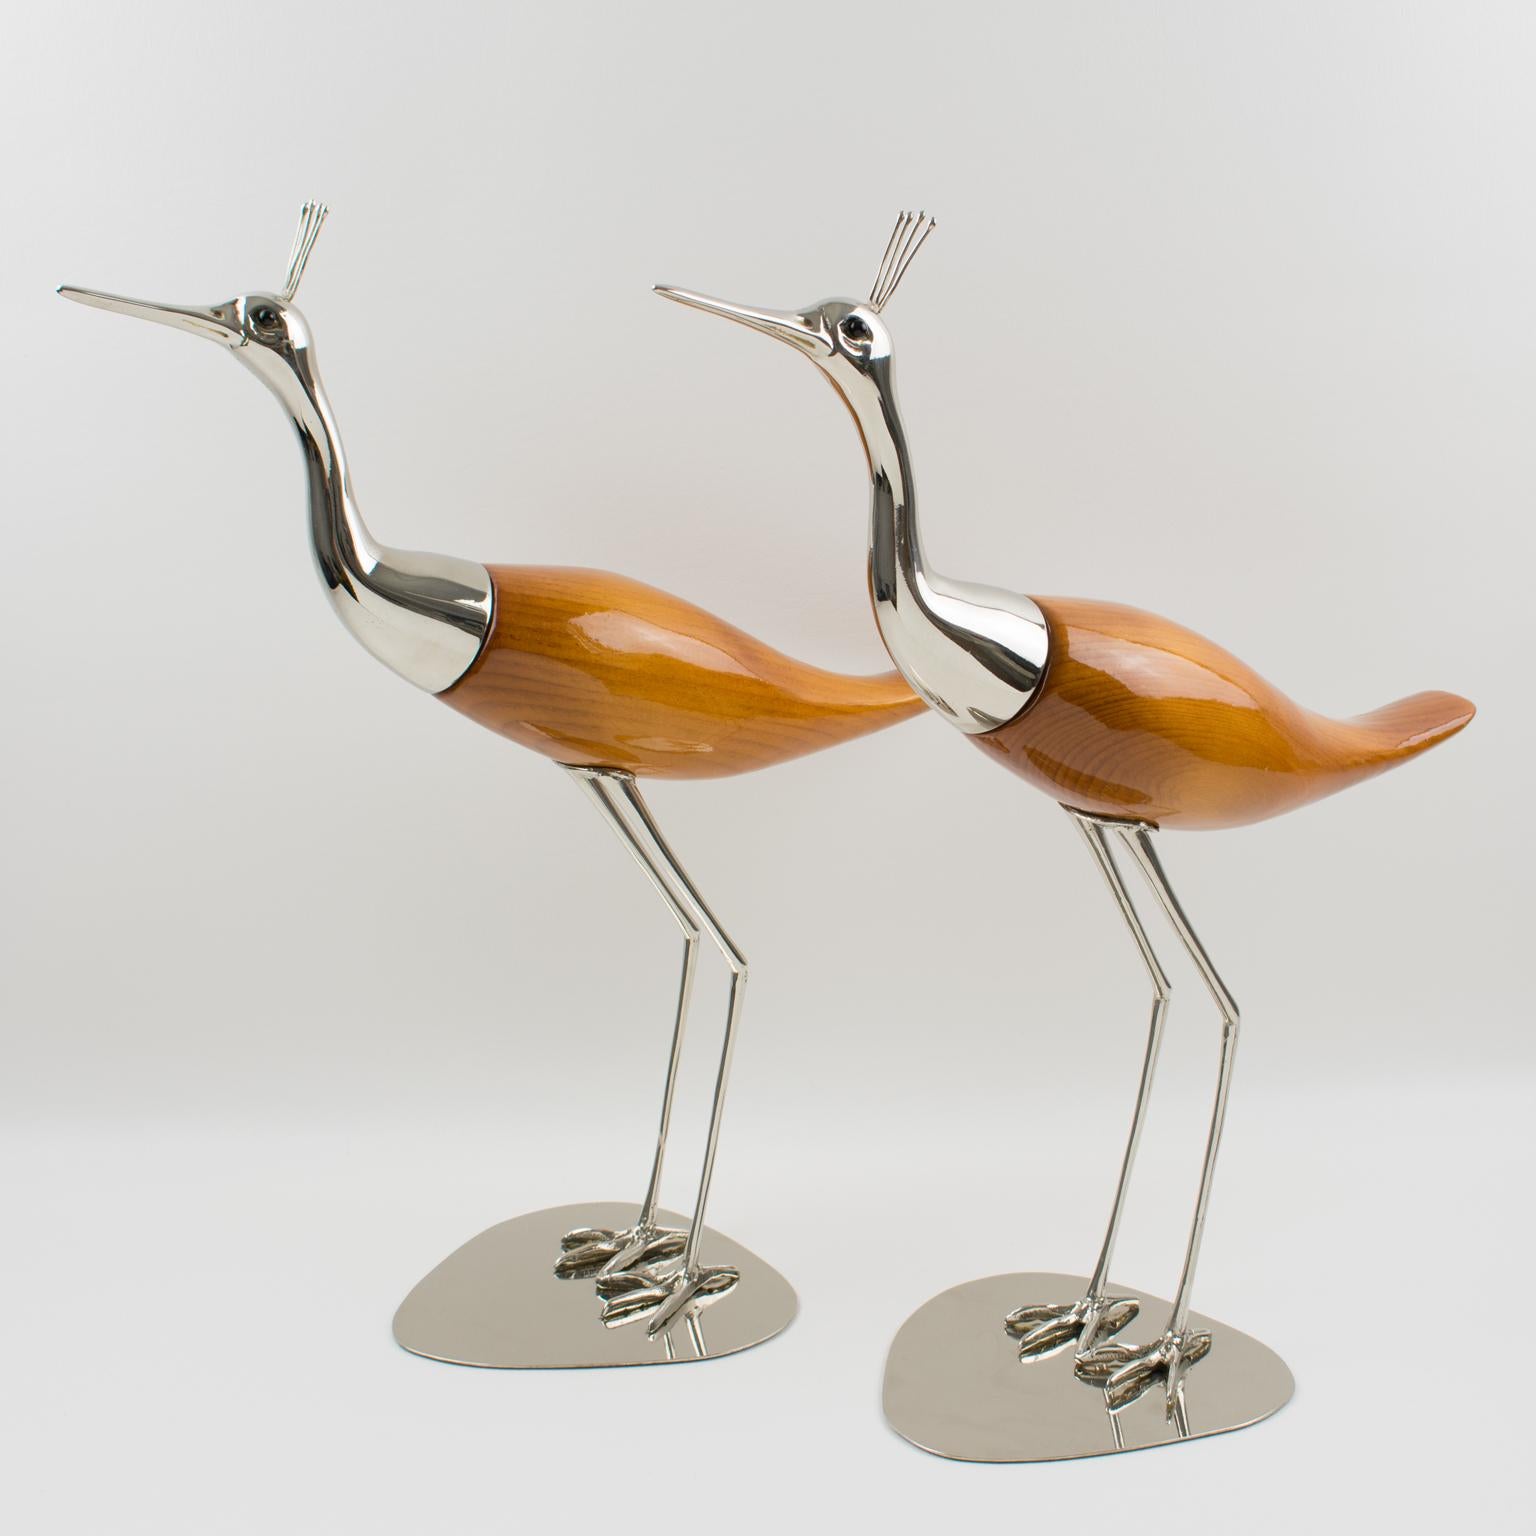 A beautiful pair of large birds, egret or wader, designed and handcrafted by Italian company De Stijl in Firenze. Each bird is carefully crafted with silvered metal and glossy polished lacquered carved wood and has black glass eyes. They have